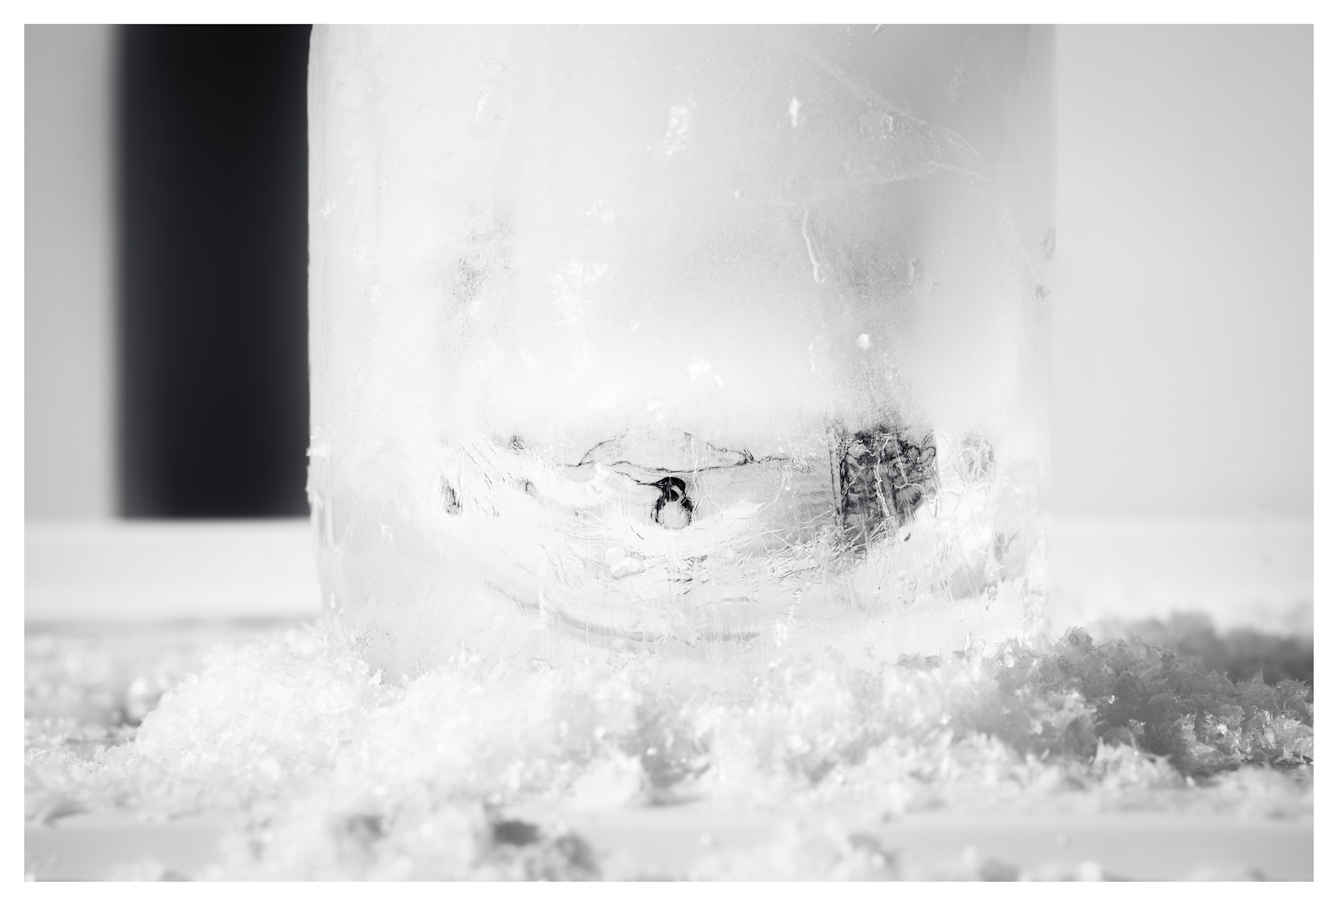 Monotone photograph showing a cylindrical core of frozen water. Encased within the ice is an illustration of a penguin from the 1800s, that can just be seen through the distortions of the ice wall and opaque frosting. The ice core is standing vertically on a fridge freezer shelf, surrounded by a piles of light frosted snow.